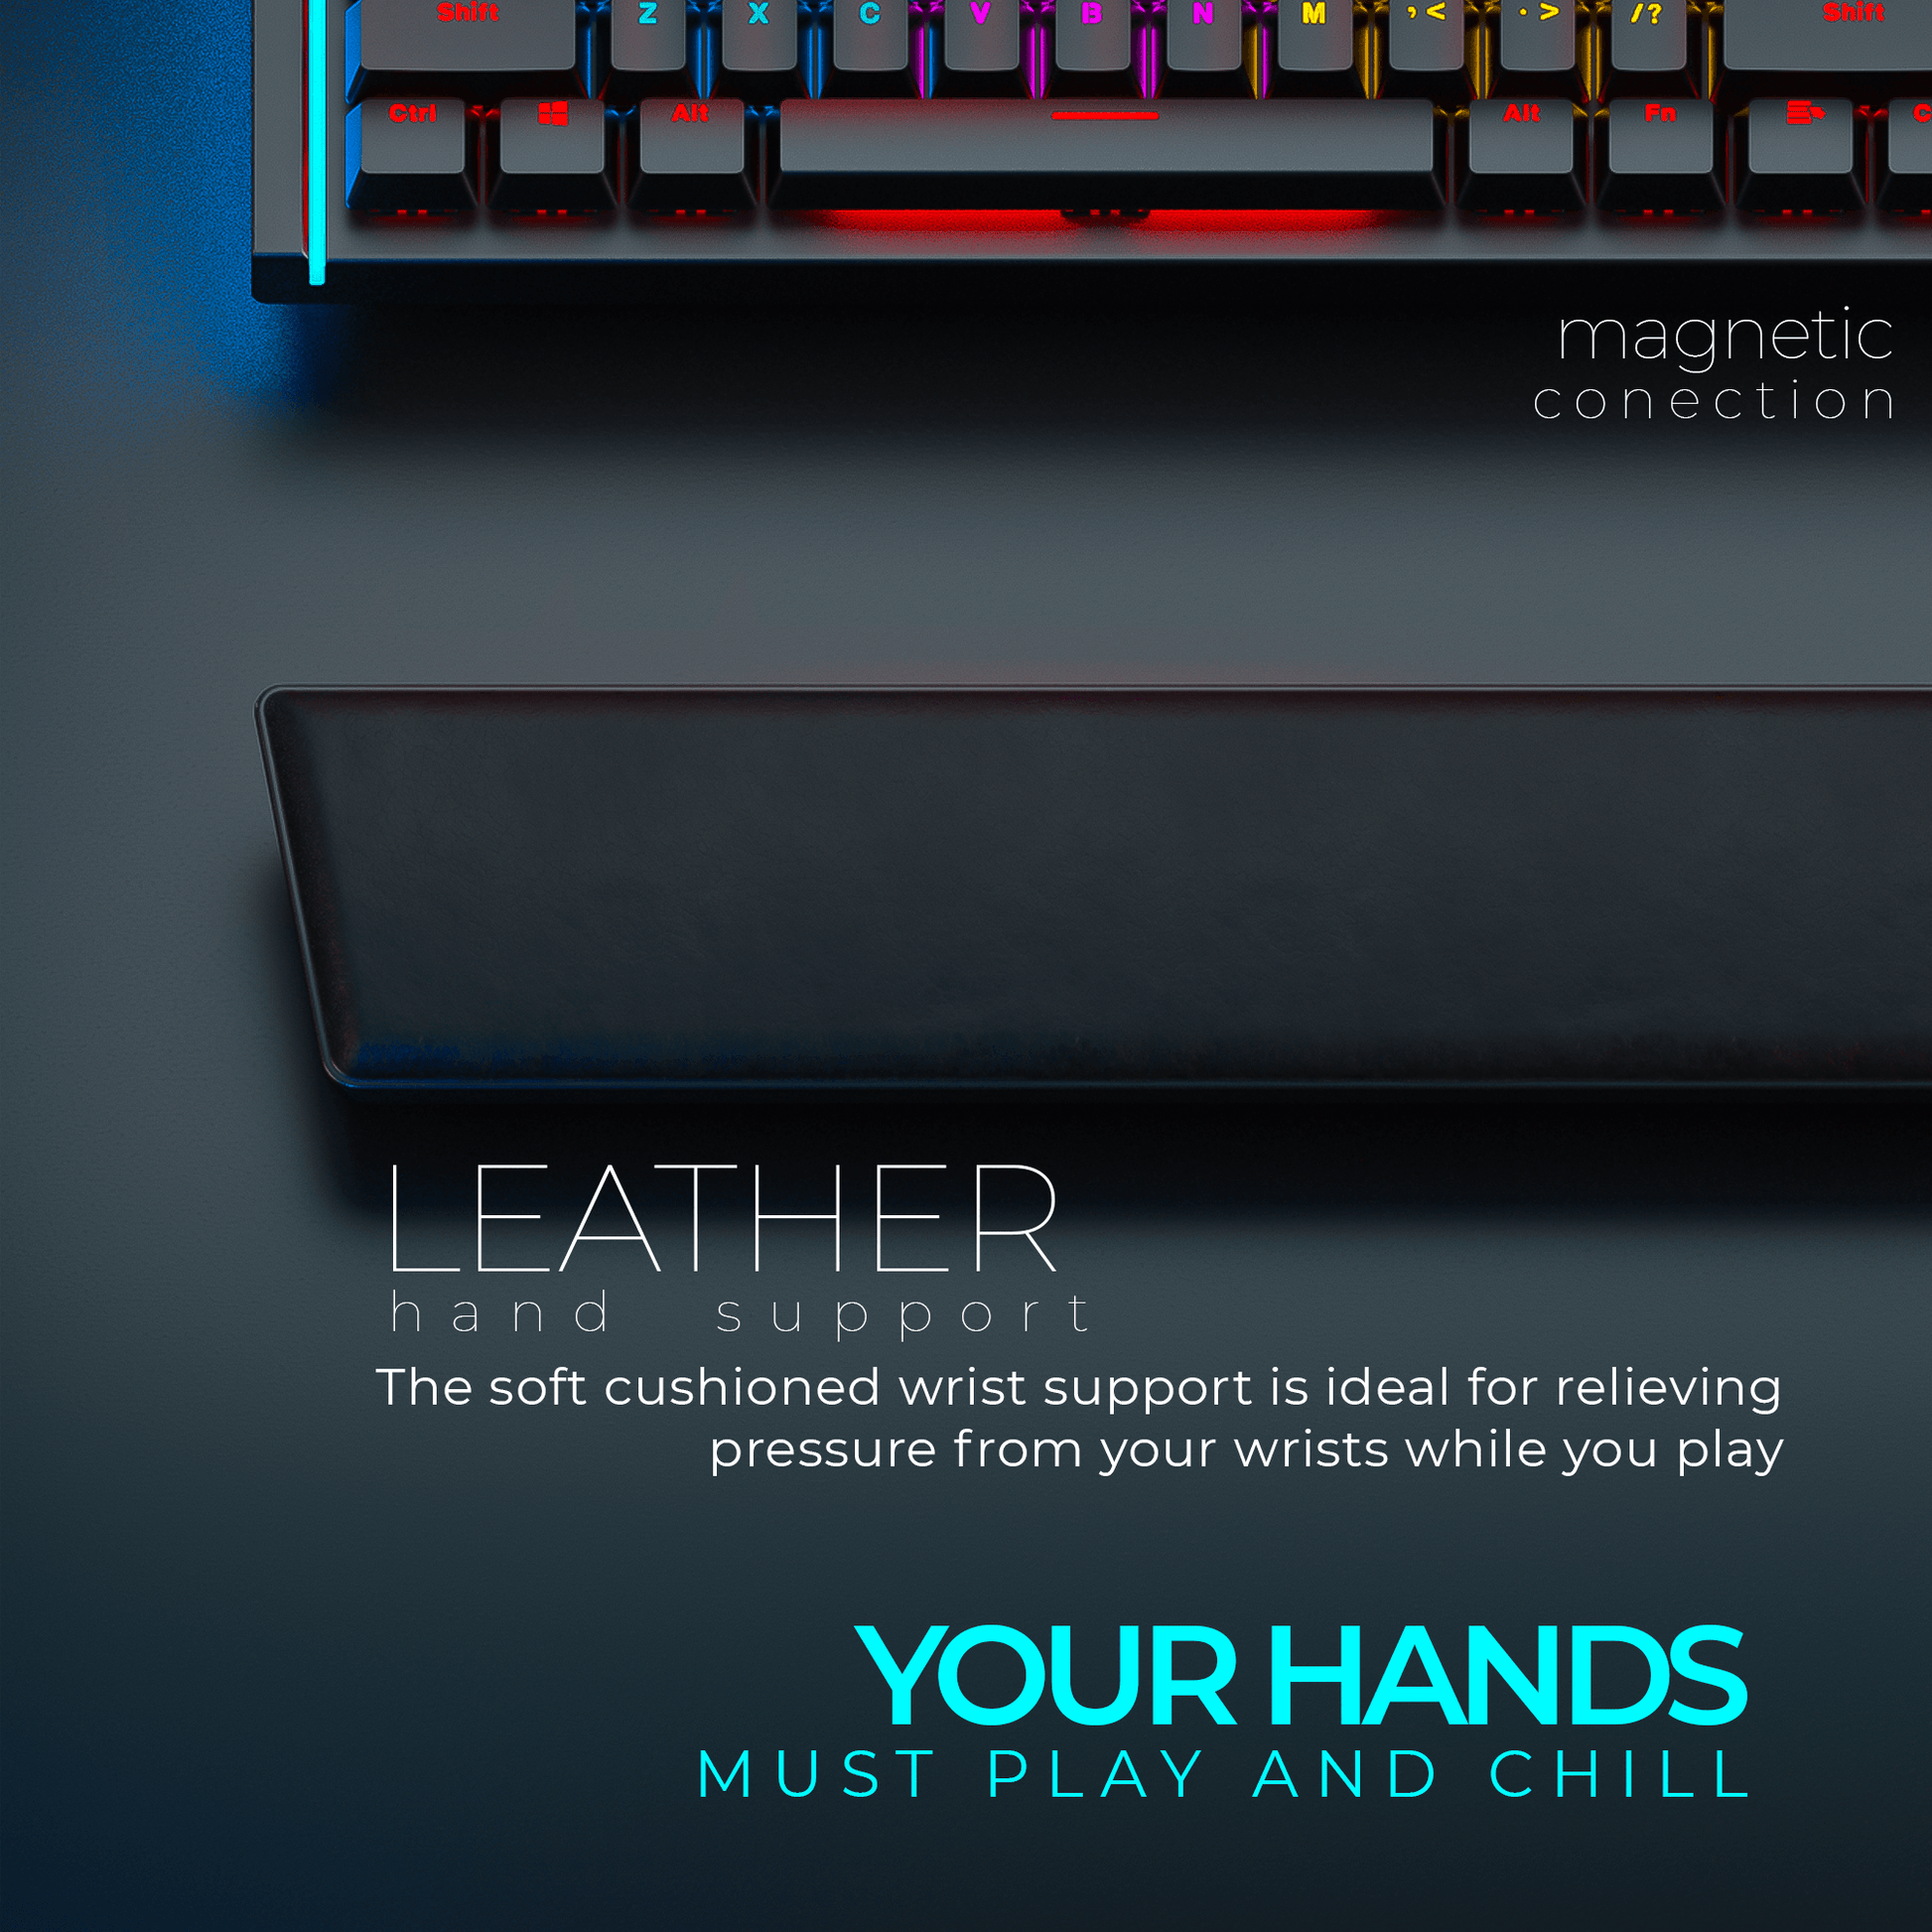 MECHANOID X107: Real Mechanical Gaming Keyboard, 107 Clicky Optical Switches, RGB Backlit - Lazy Pro